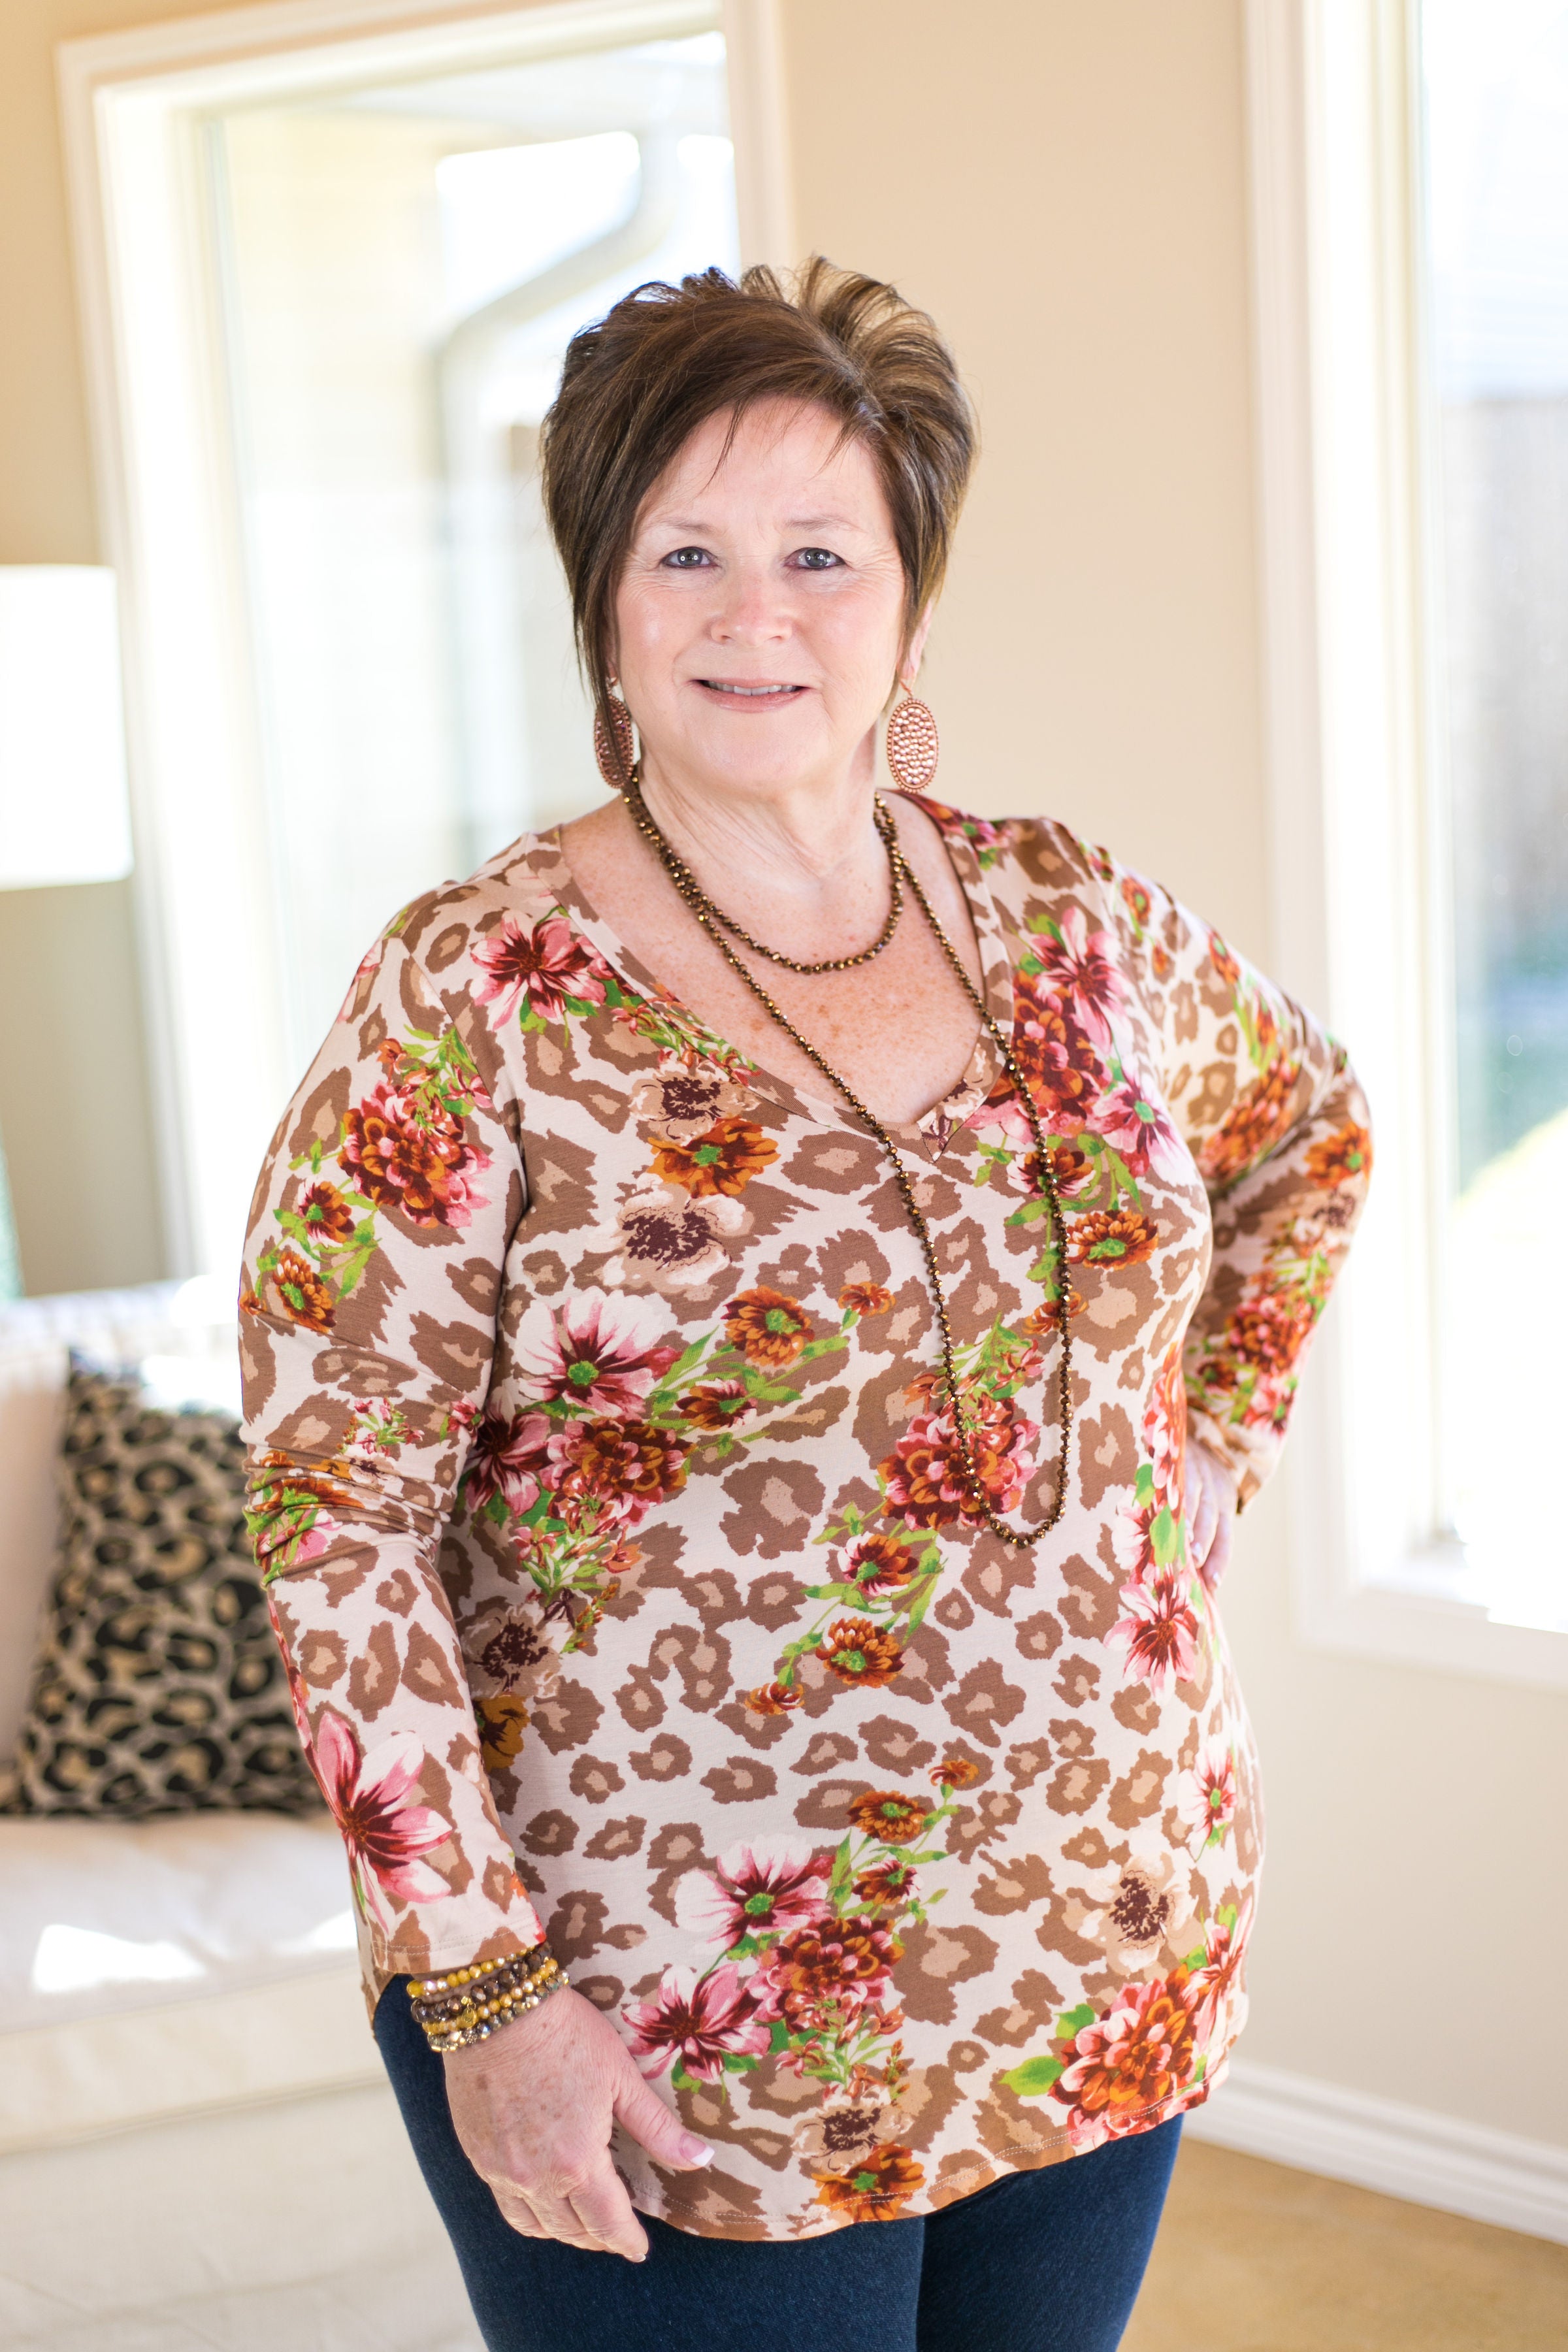 Last Chance Size Small | Perfect Chemistry Leopard and Floral Long Sleeve V-Neck Top in Mocha - Giddy Up Glamour Boutique